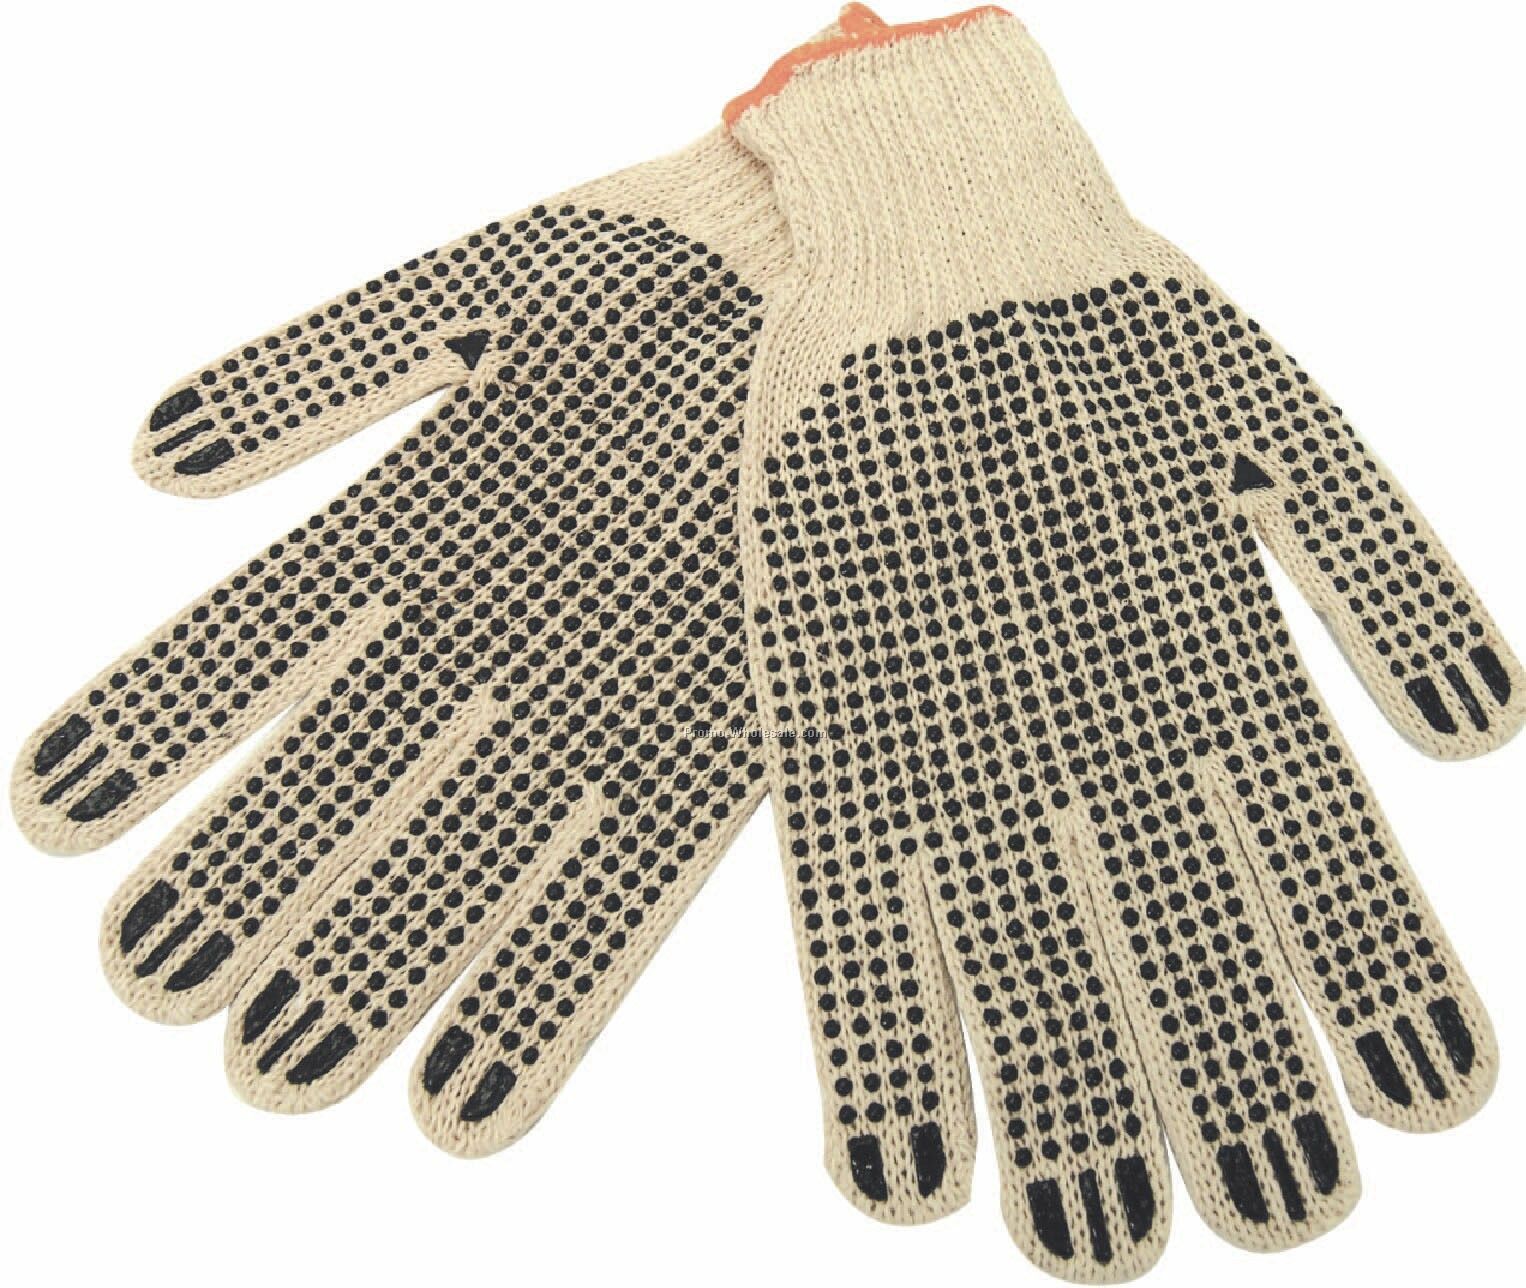 Cotton Work Gloves With Rubber Grip Dots (Blank)